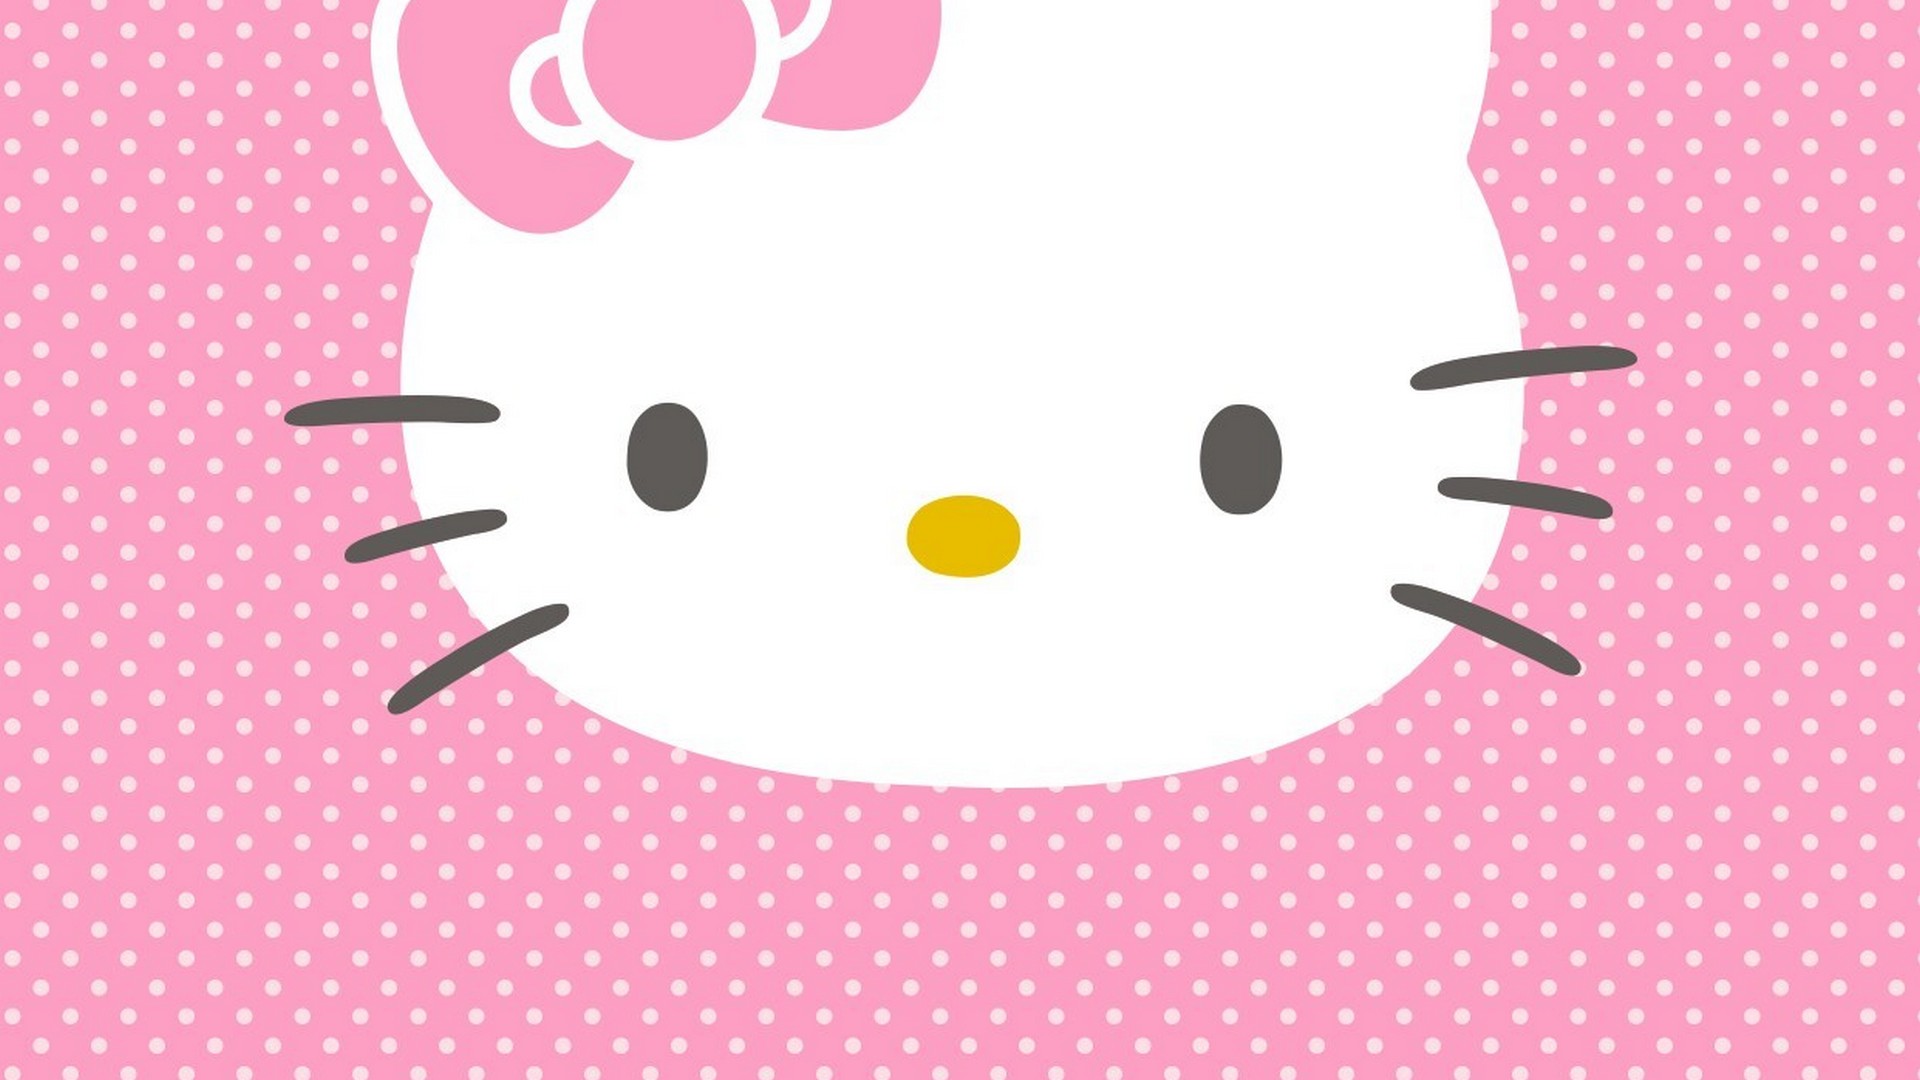 Hello Kitty Pictures Desktop Backgrounds With Resolution 1920X1080 pixel. You can make this wallpaper for your Desktop Computer Backgrounds, Mac Wallpapers, Android Lock screen or iPhone Screensavers